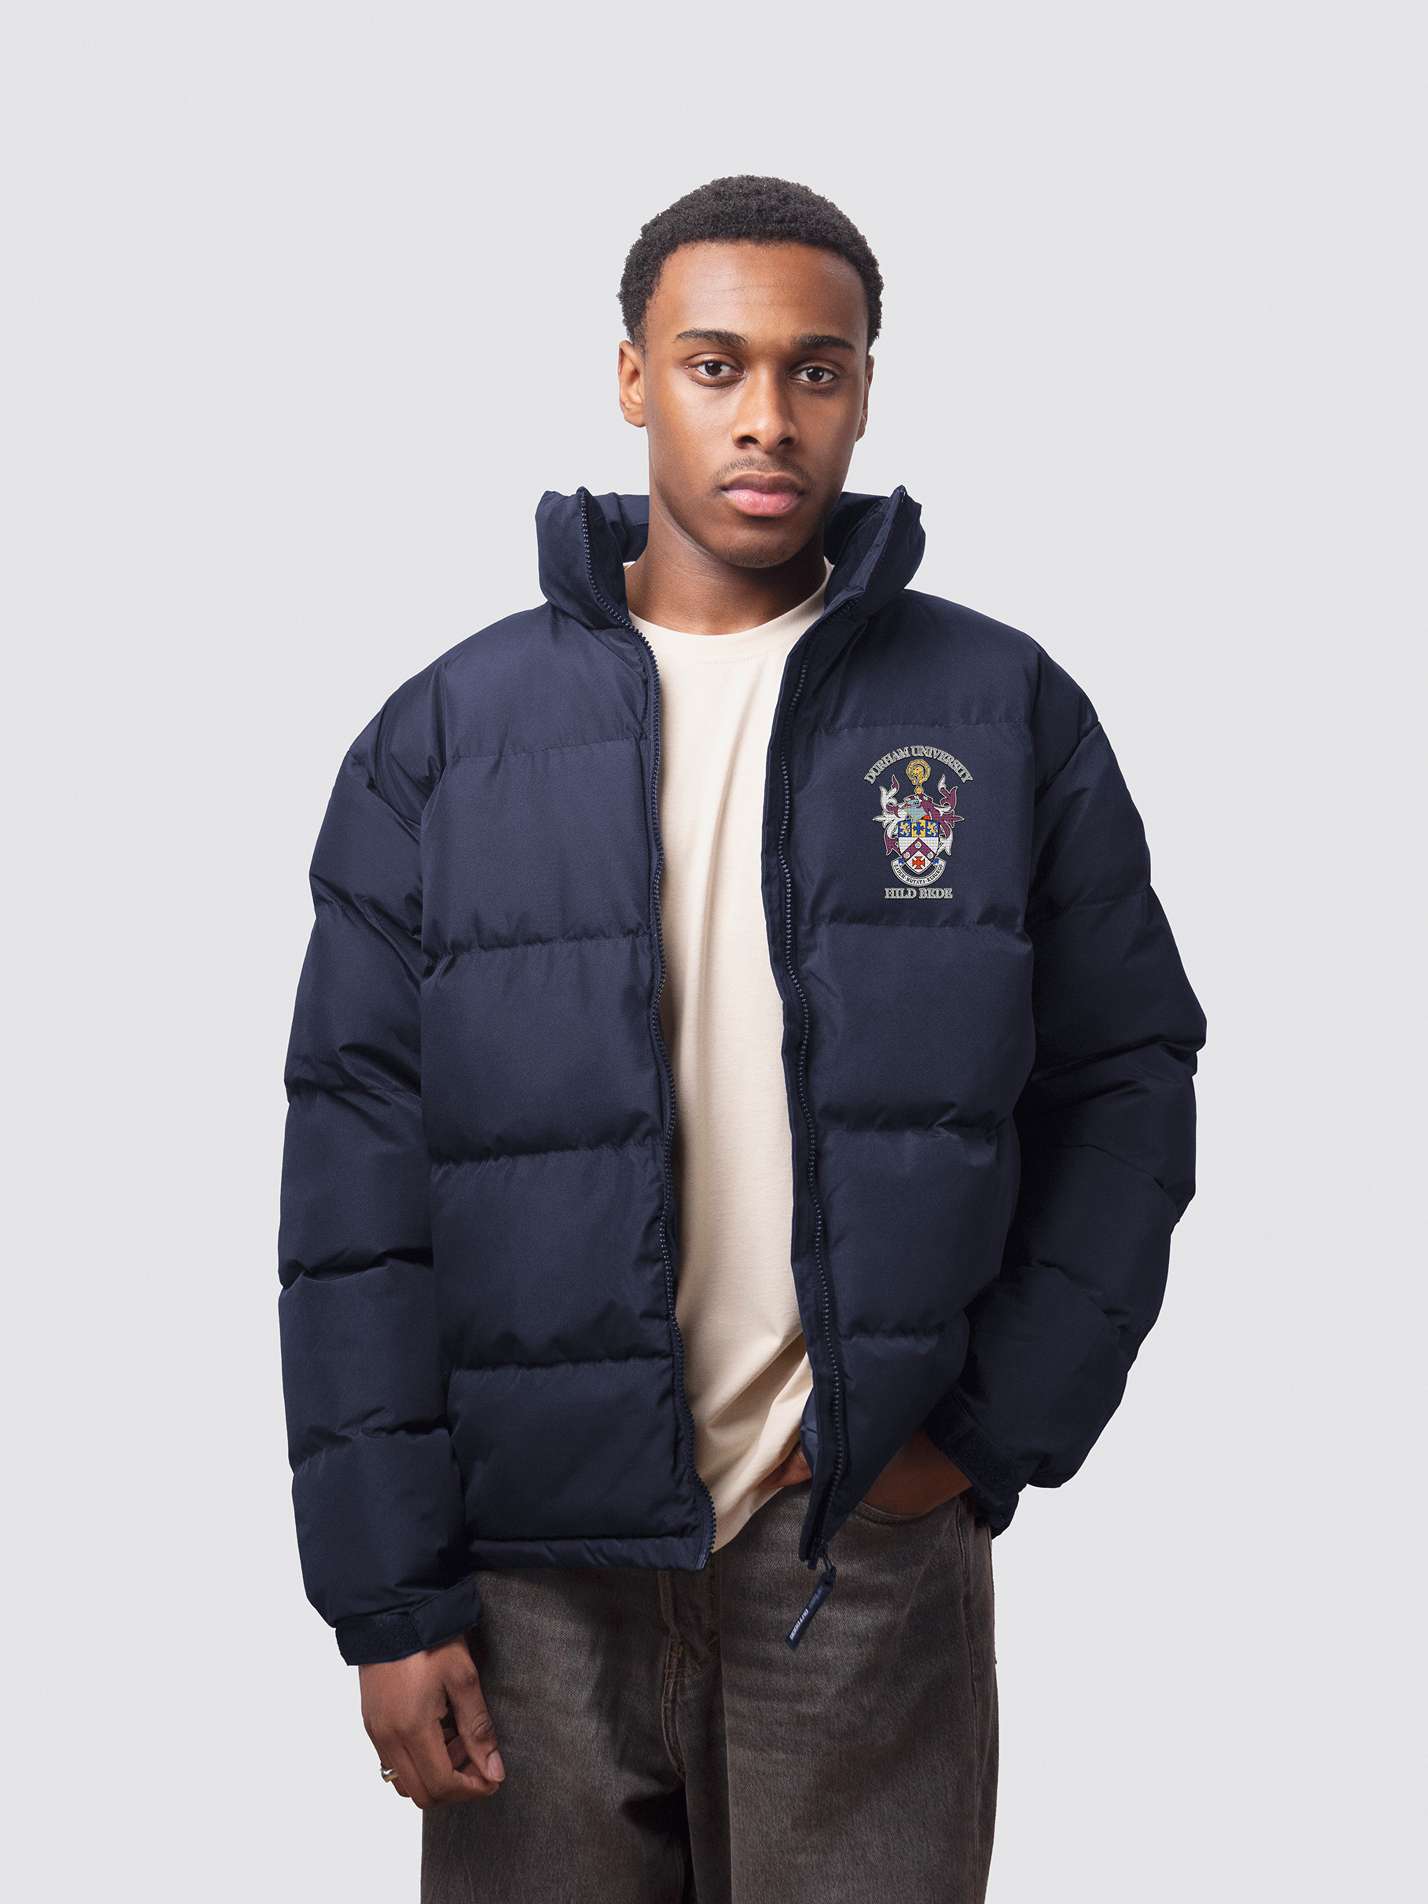 Navy Durham University puffer jacket, with embroidery on the left chest